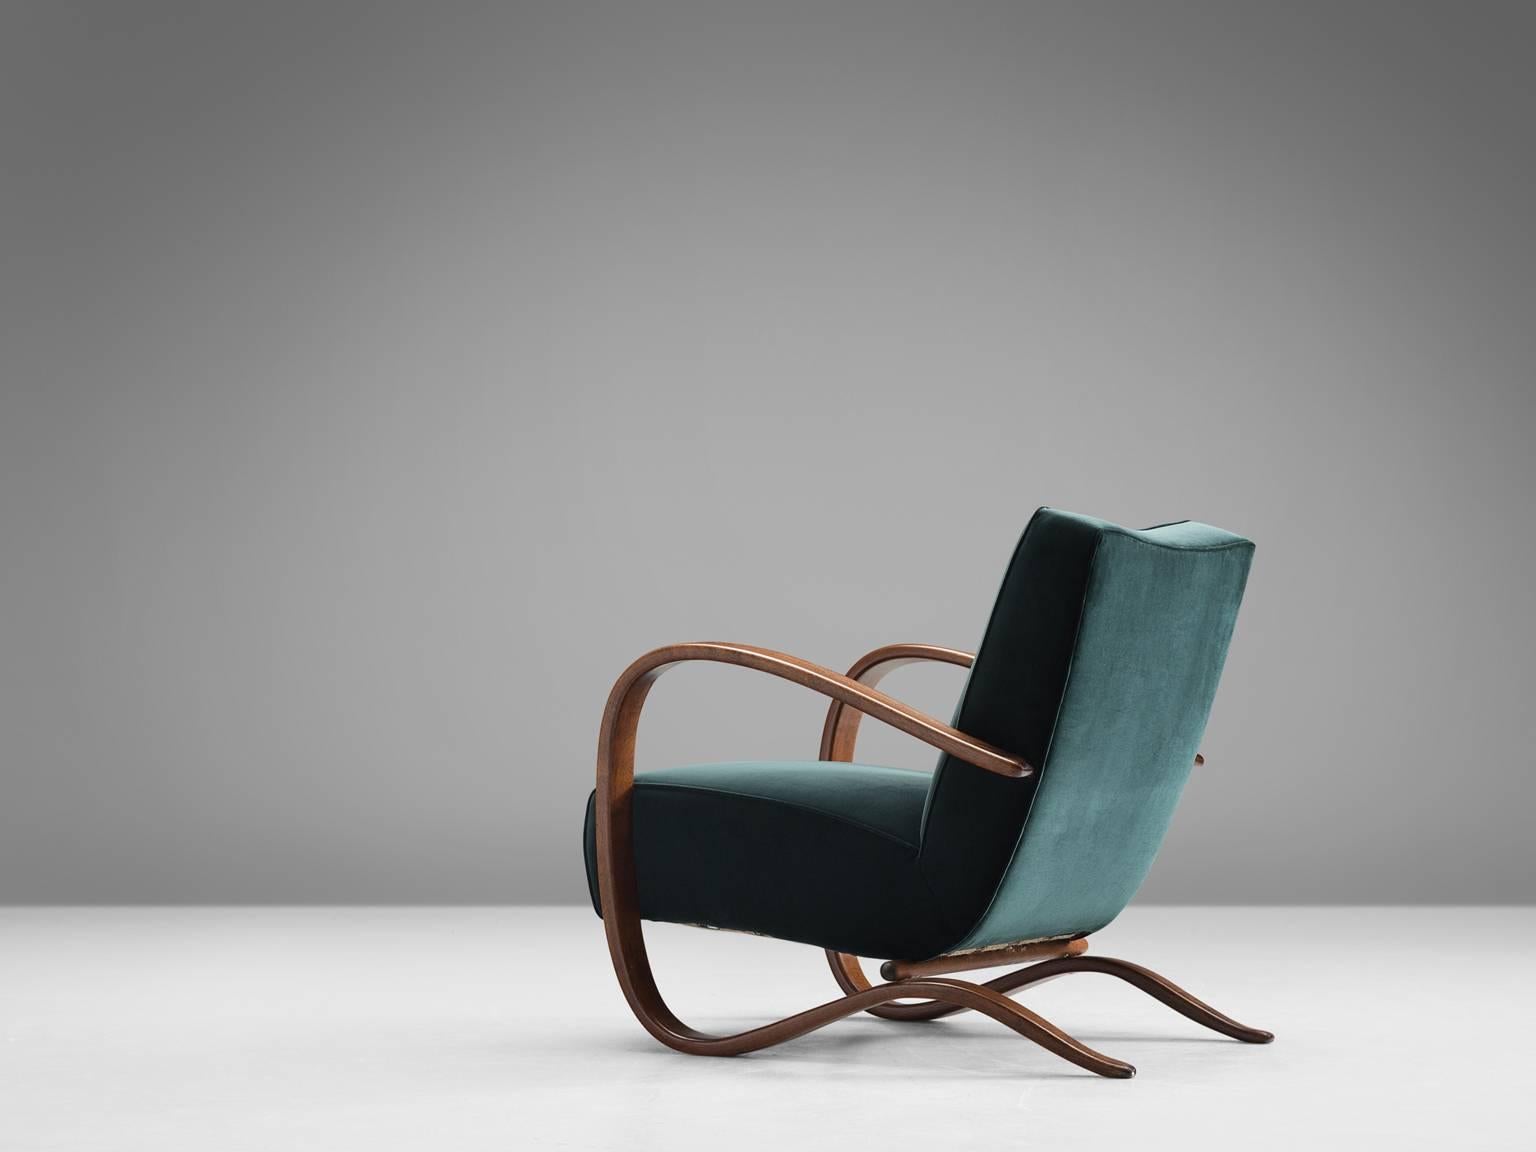 Lounge chair, deep green Kvadrat velvet and stained beech, by Jindrich Halabala, Czech Republic, 1930s. 

Extraordinary easy chair with dark green velours upholstery. This chair has a very dynamic appearance. This dreamy upholstery gives this